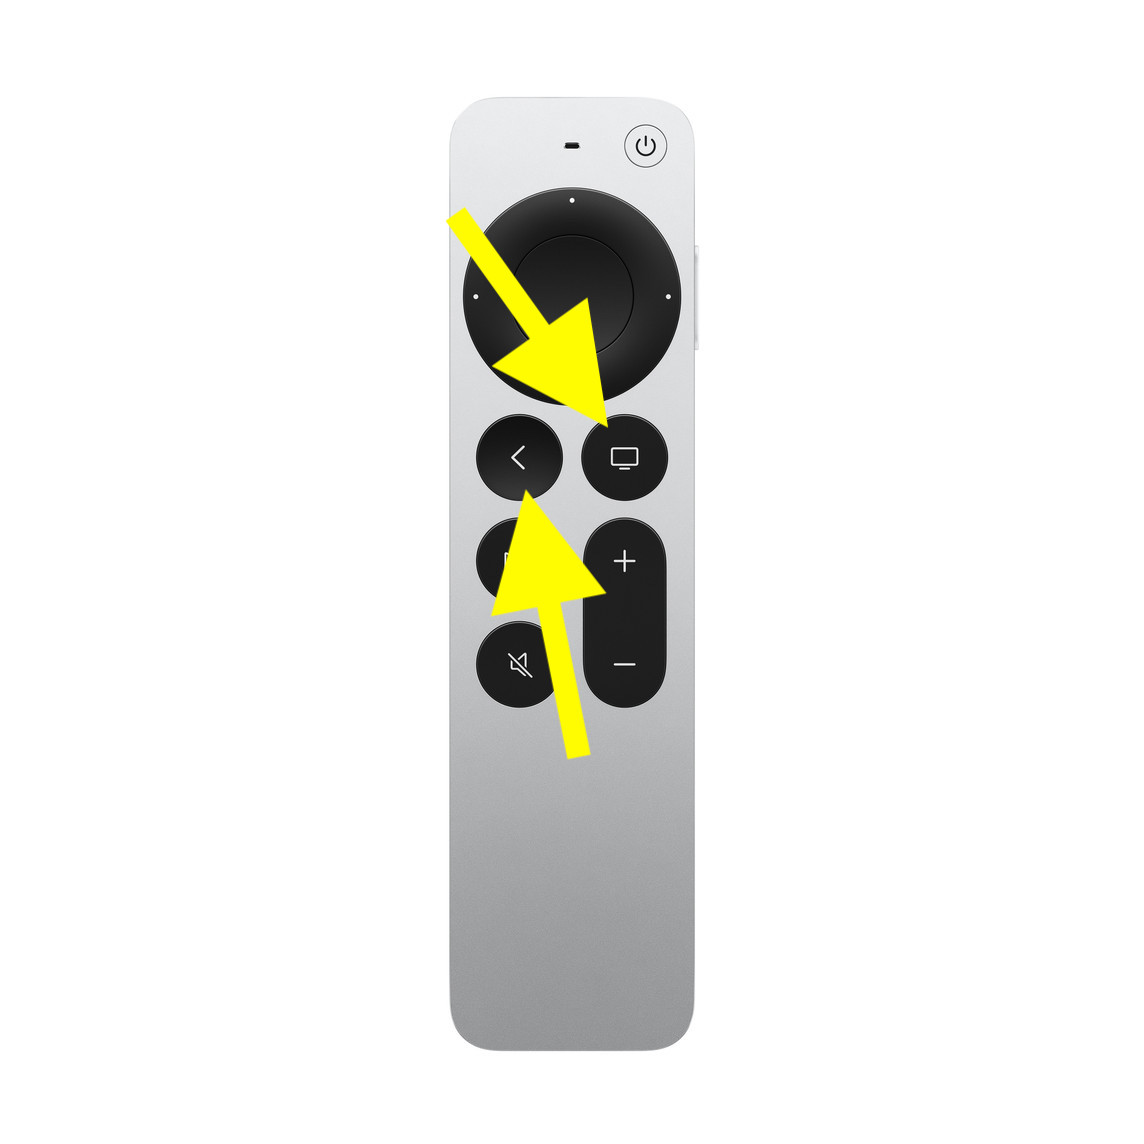 A photo of Apple TV remote